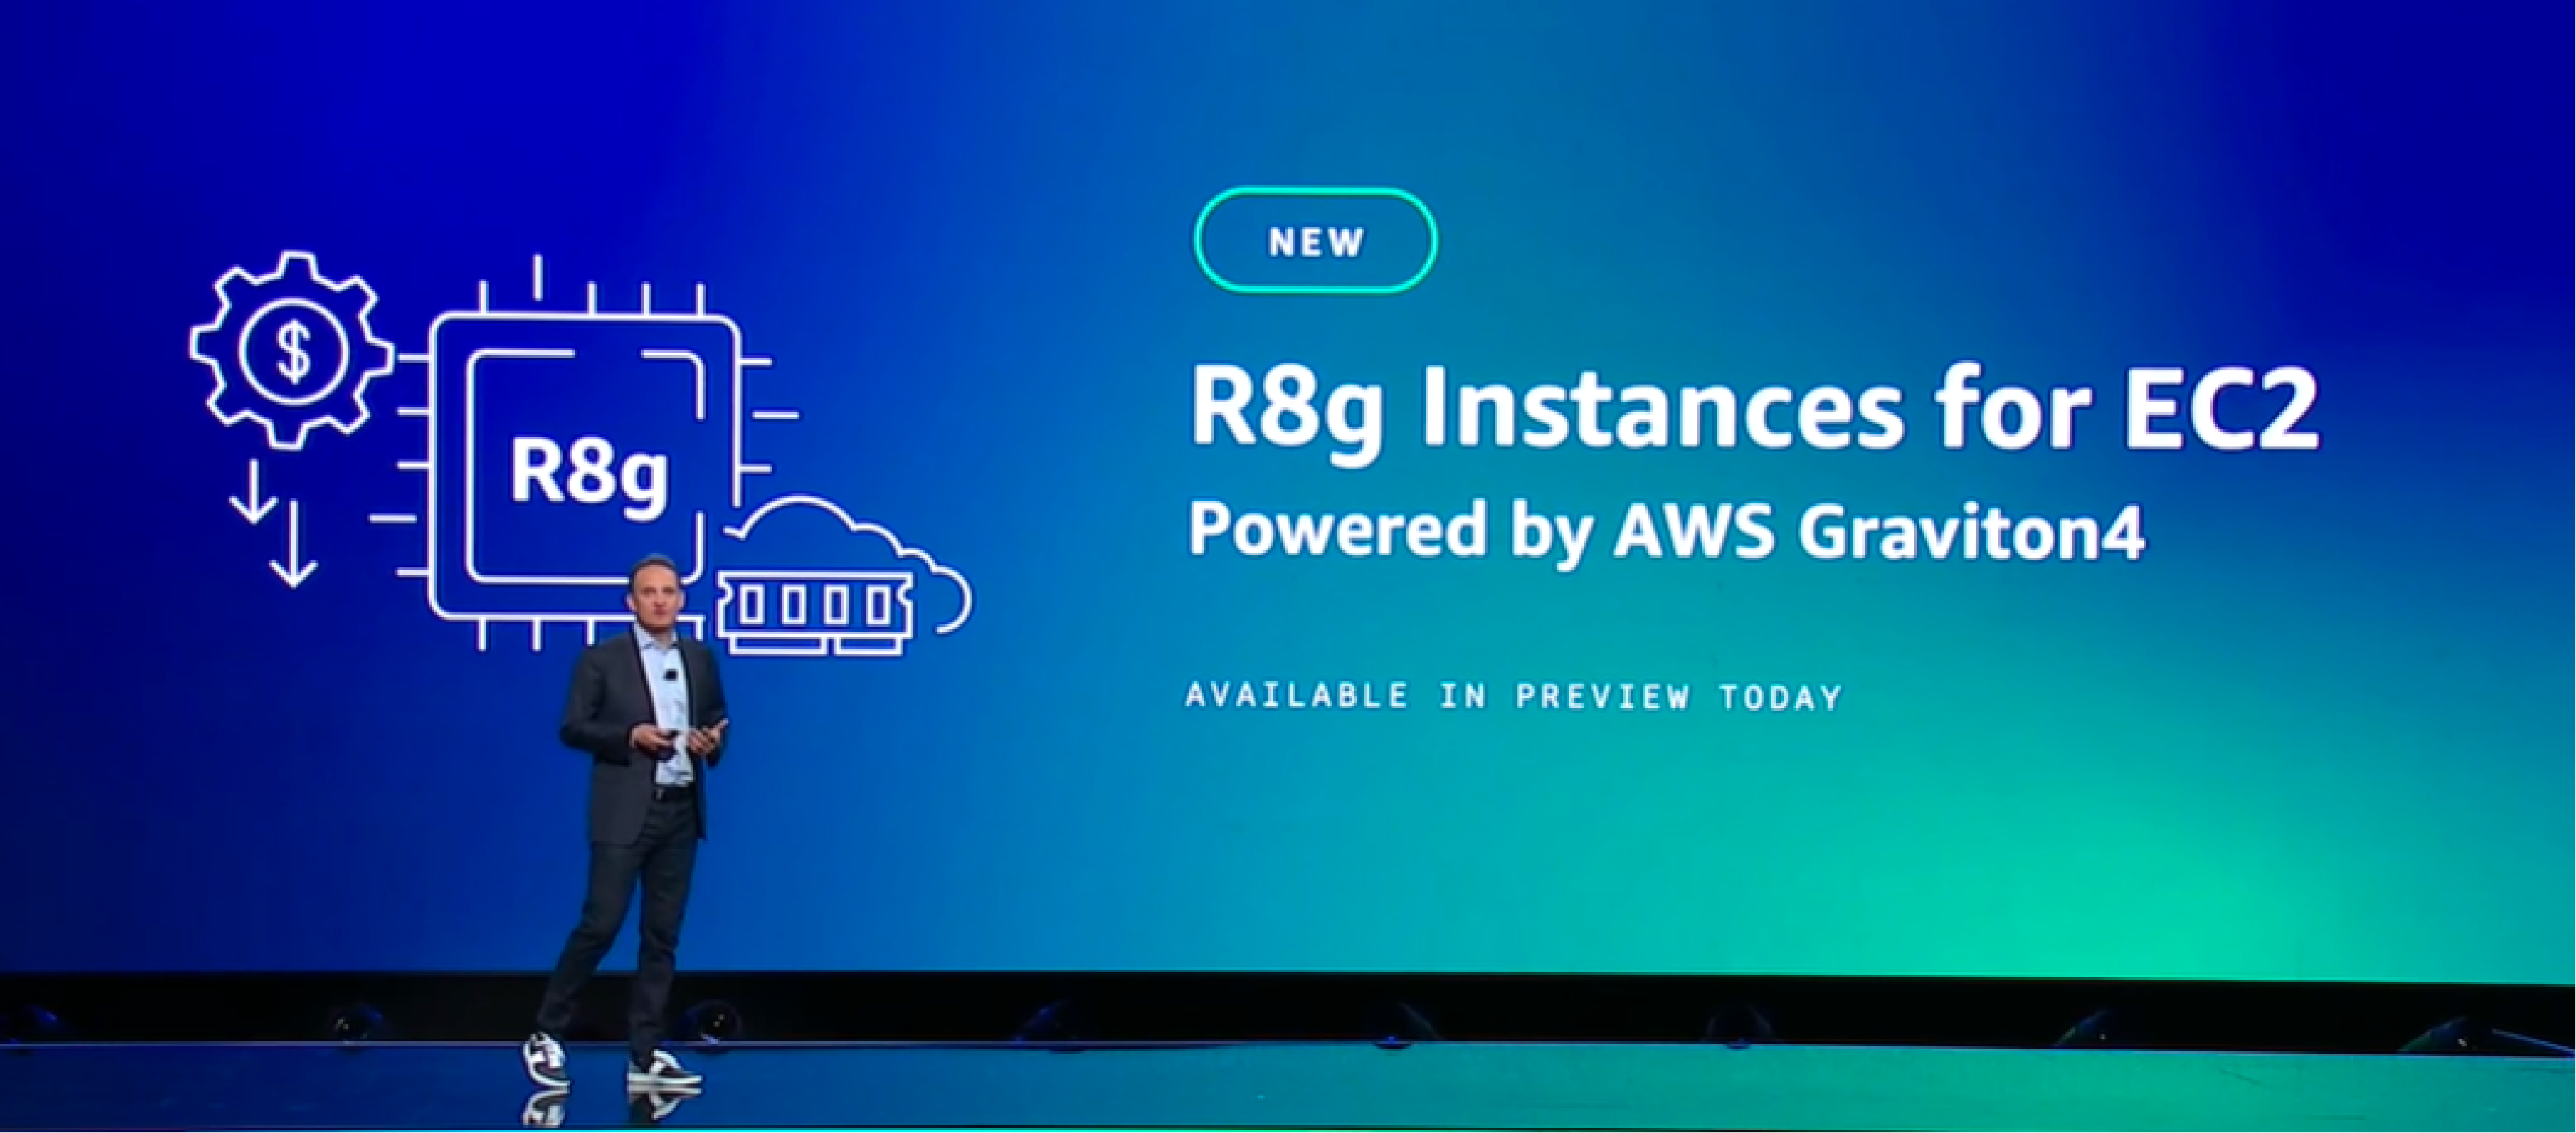 Overview highlighting features of Amazon EC2 R8g instances powered by AWS Graviton4 processors